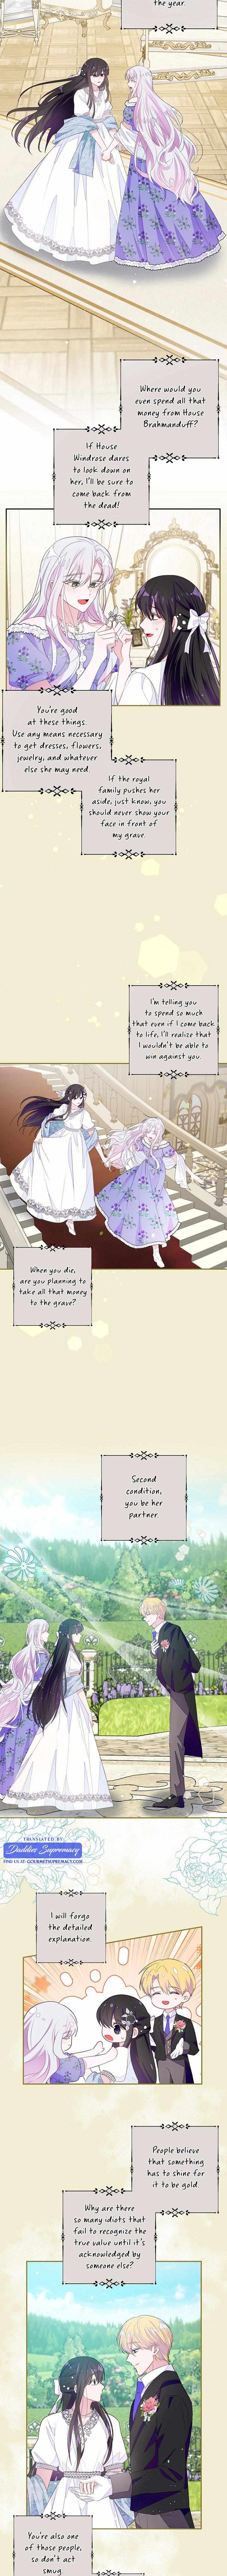 The Bad Ending Of The Otome Game - Page 2